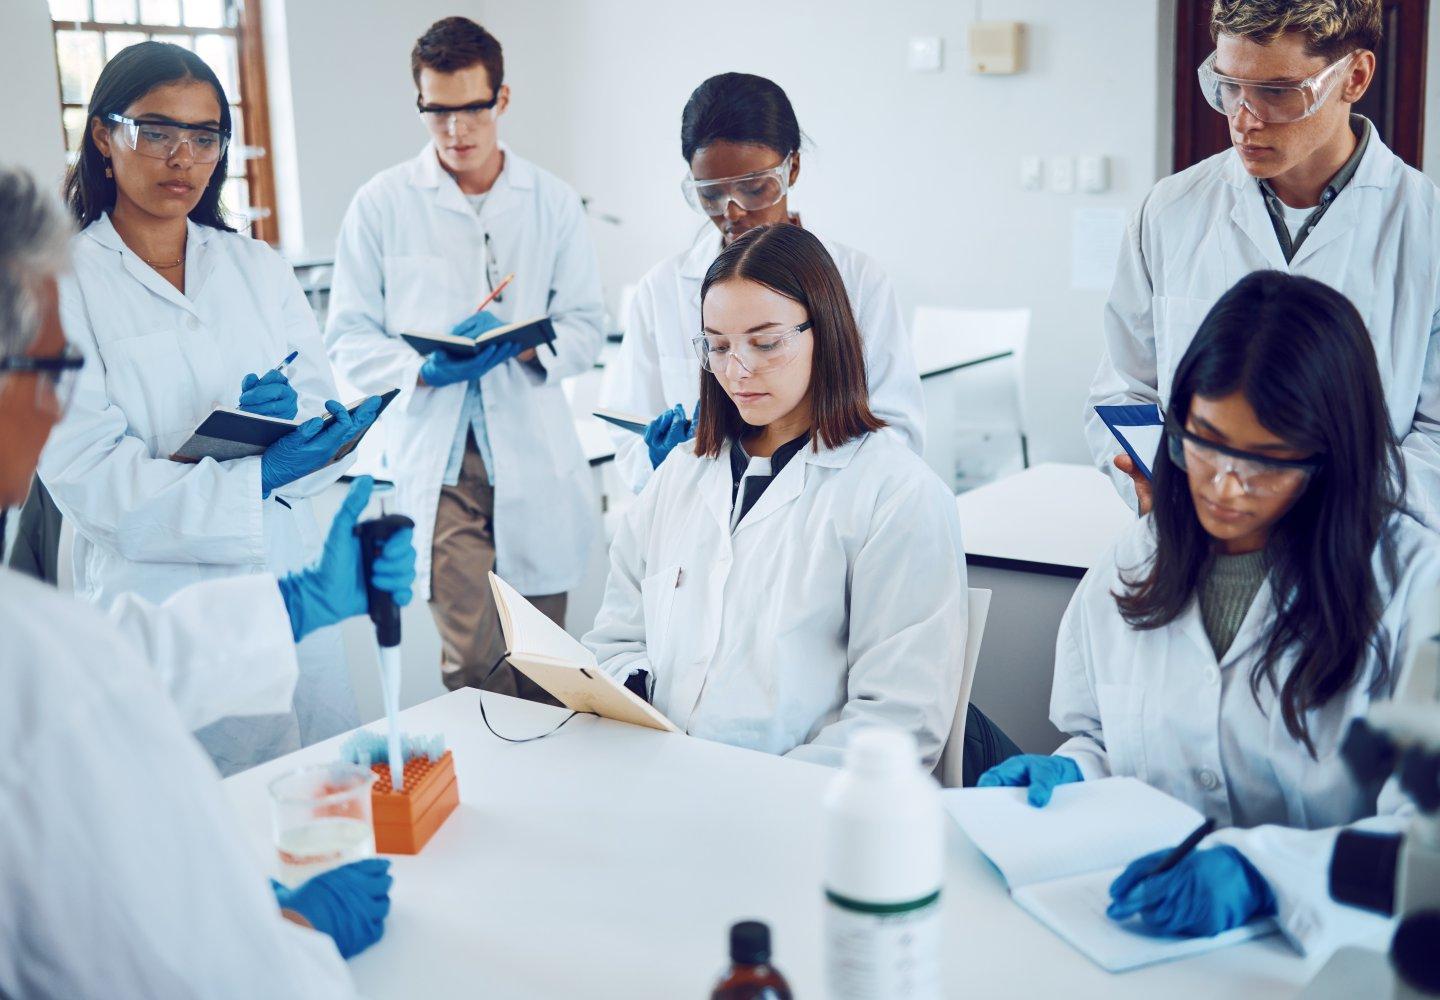 Science students writing notes in a laboratory